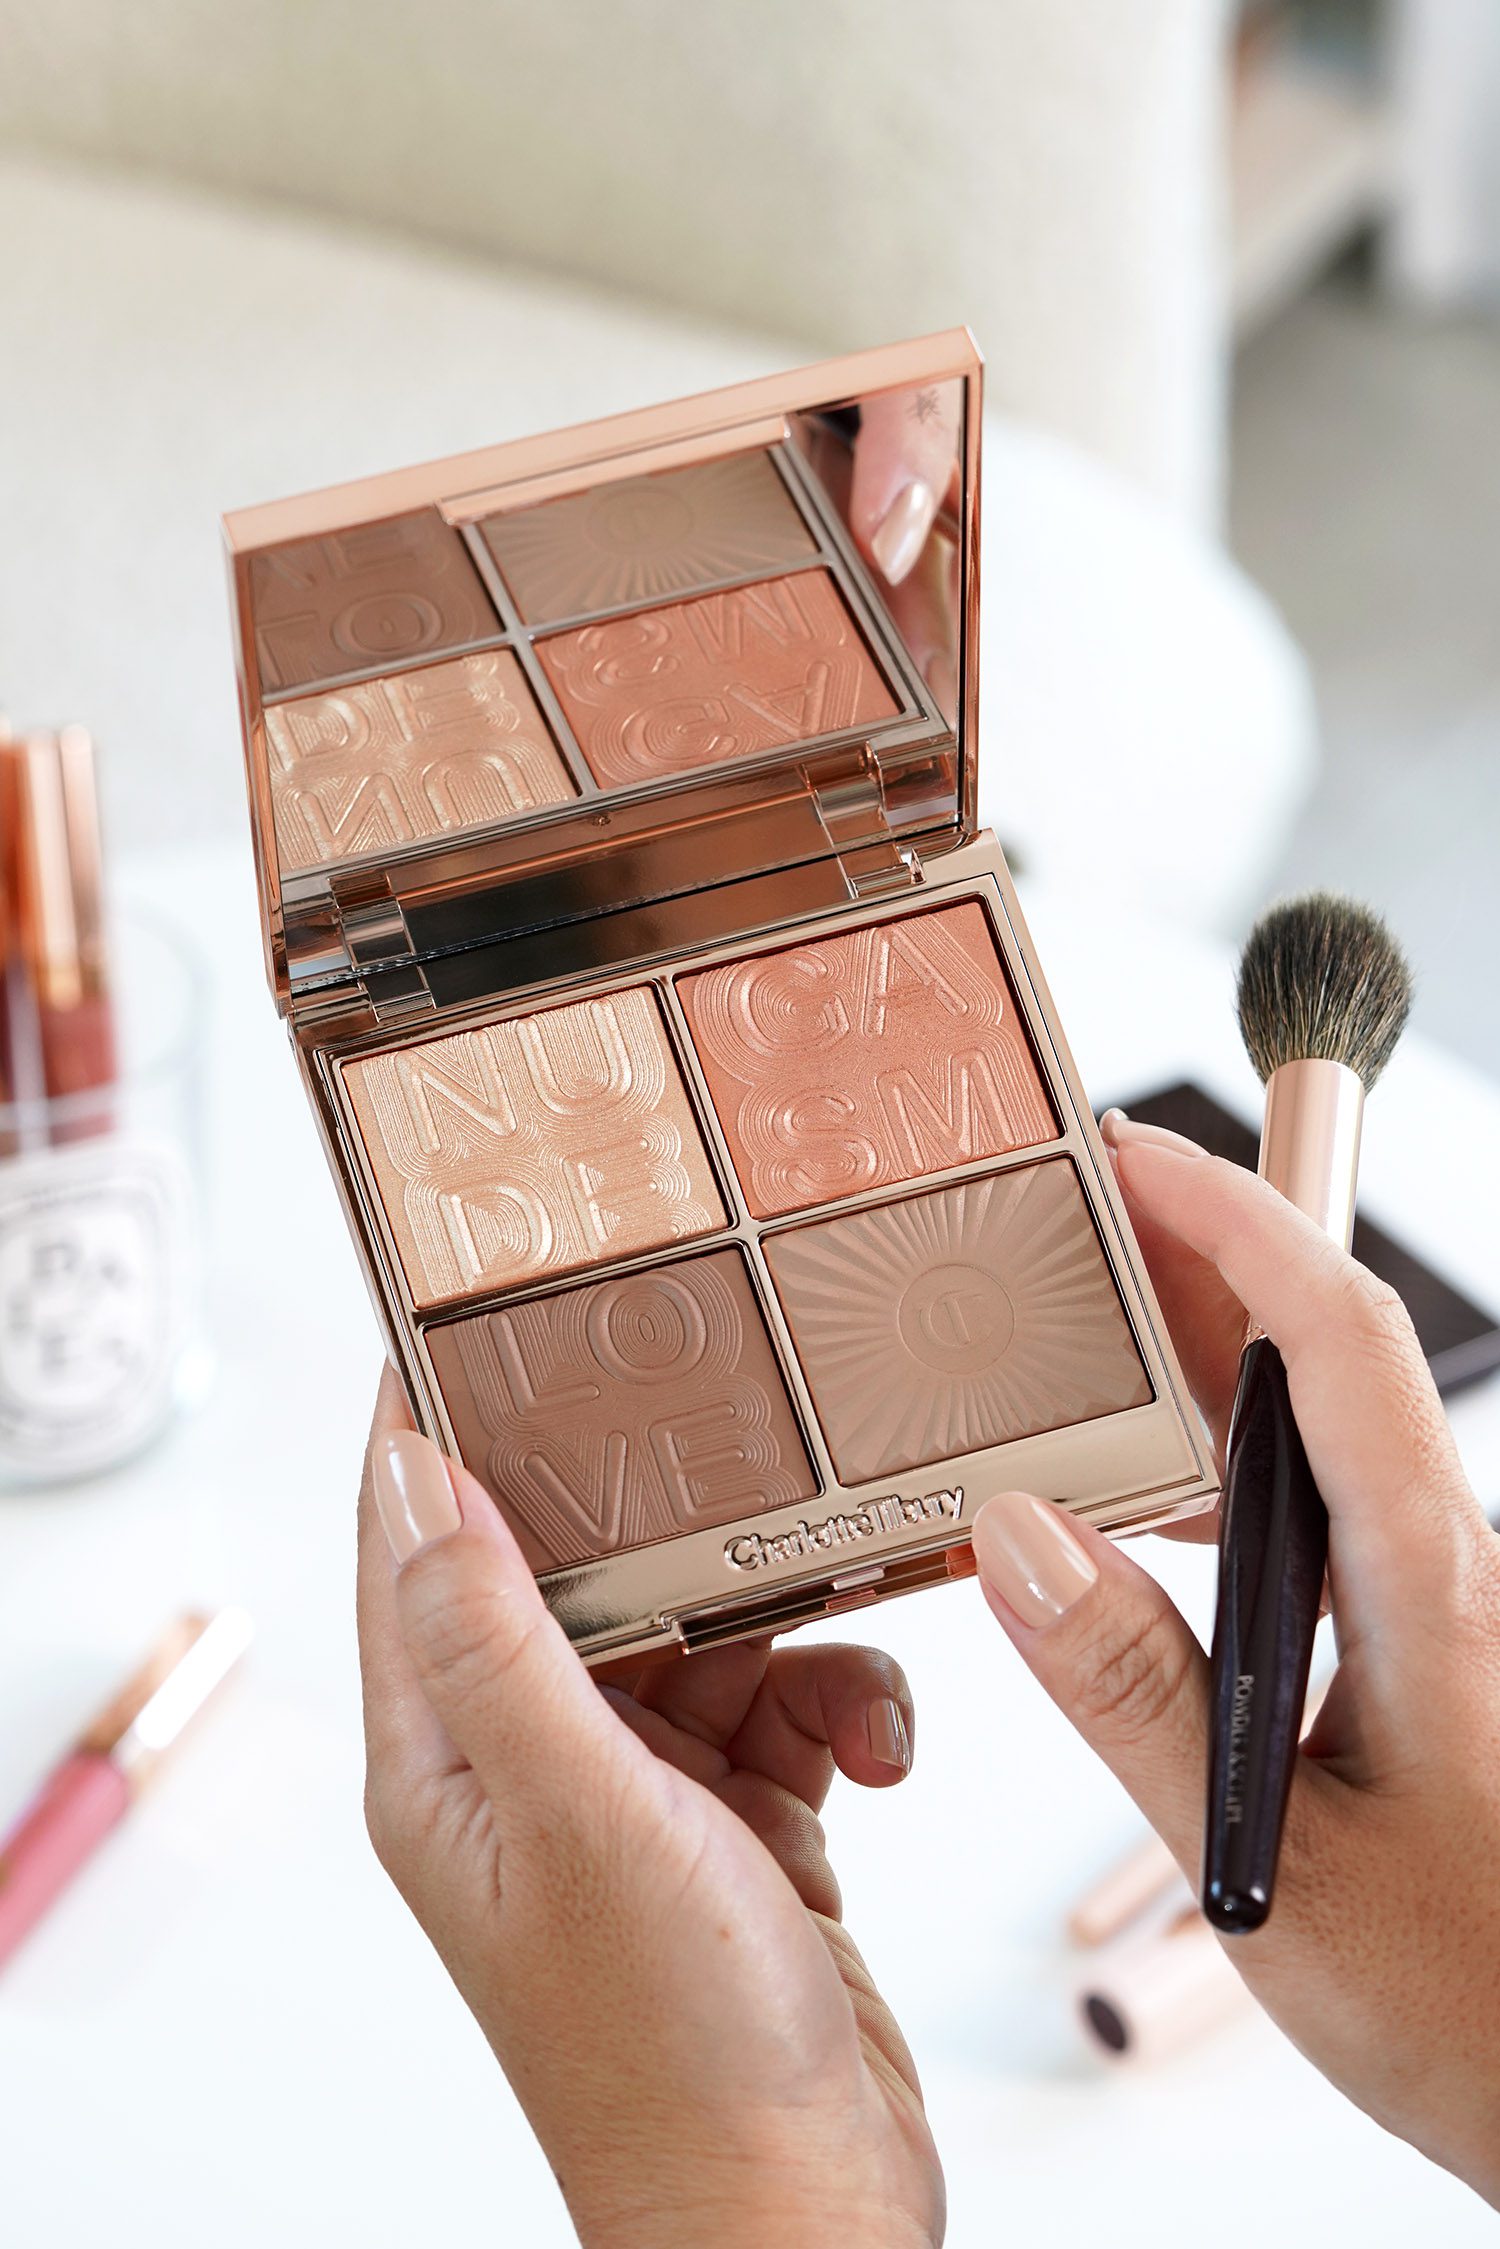 Charlotte Tilbury Super Nudes Collection - The Beauty Look Book